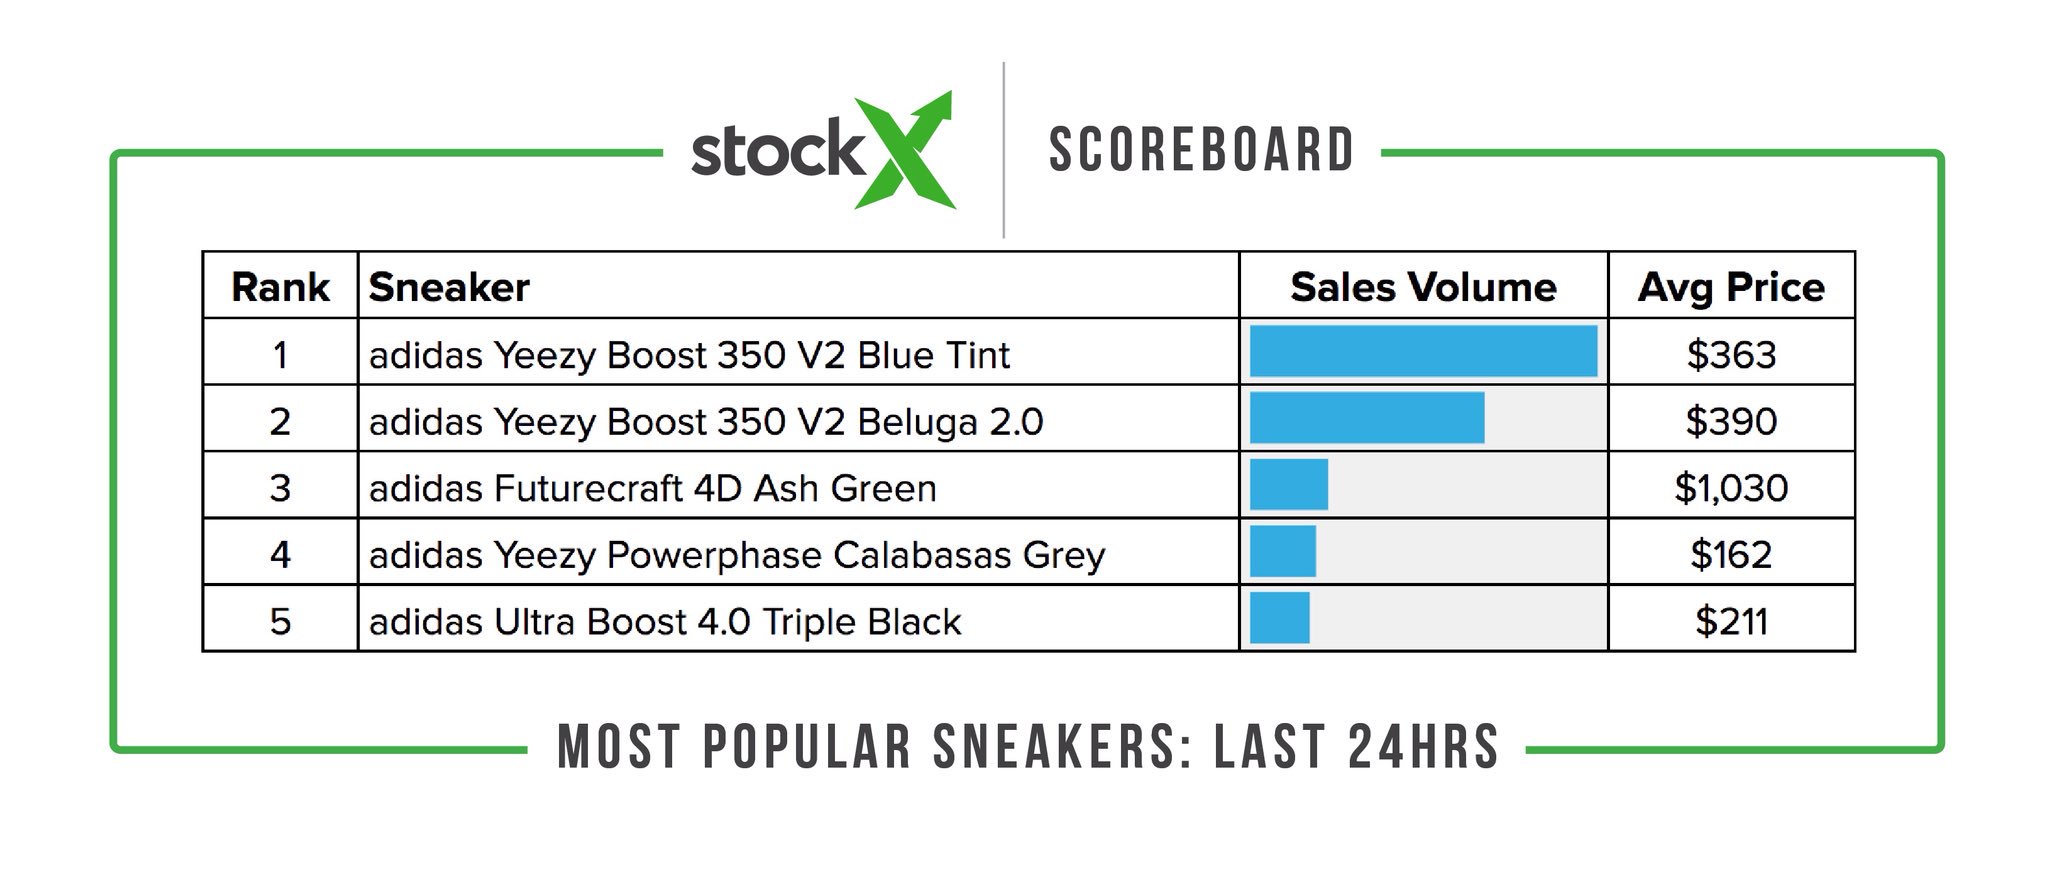 StockX on Twitter: "The adidas Futurecraft “Ash Green” continues to sell briskly, ranking 3rd on our #StockXScoreboard, with average prices falling from yesterday to $1,030 today. /